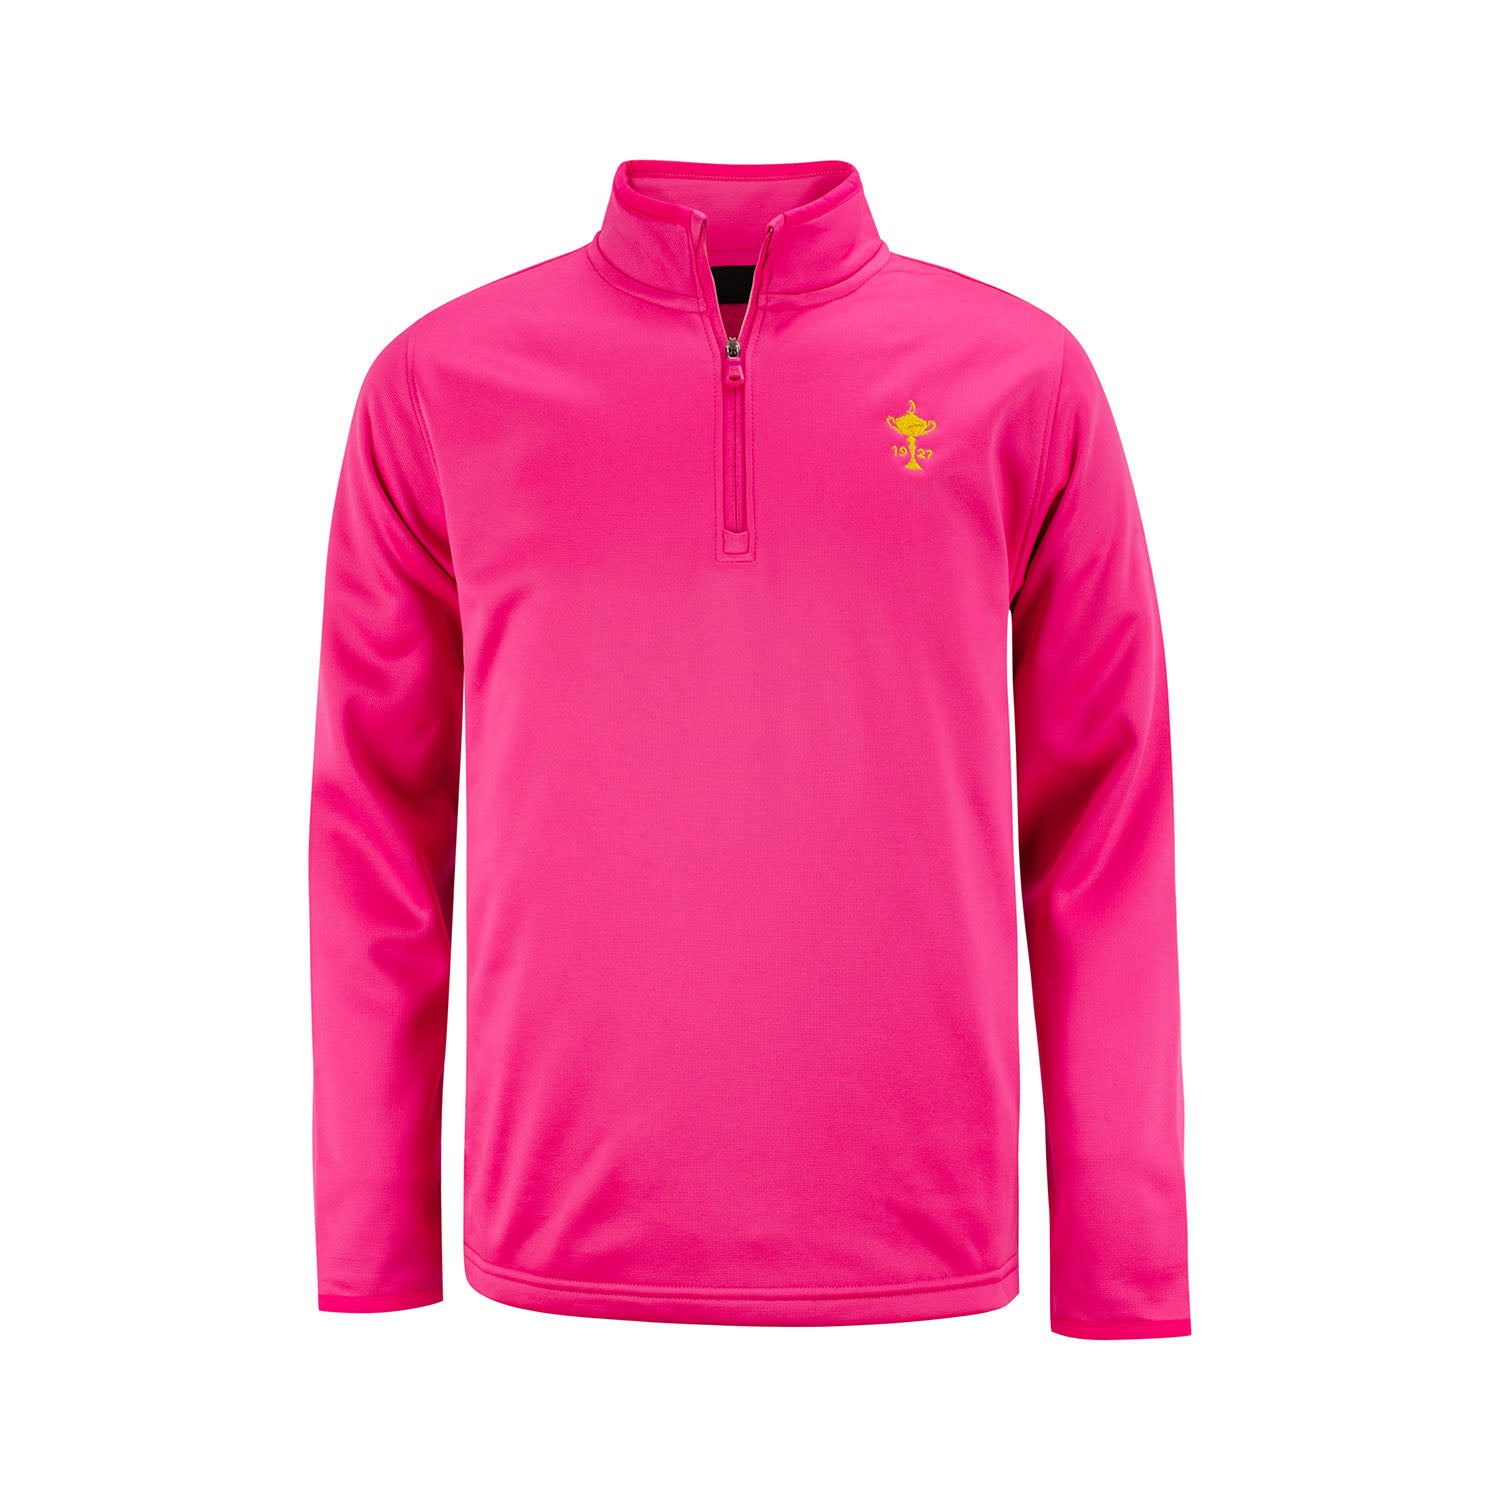 Girls Youth Armour Fleece 1/2 Zip in Pink- Front View